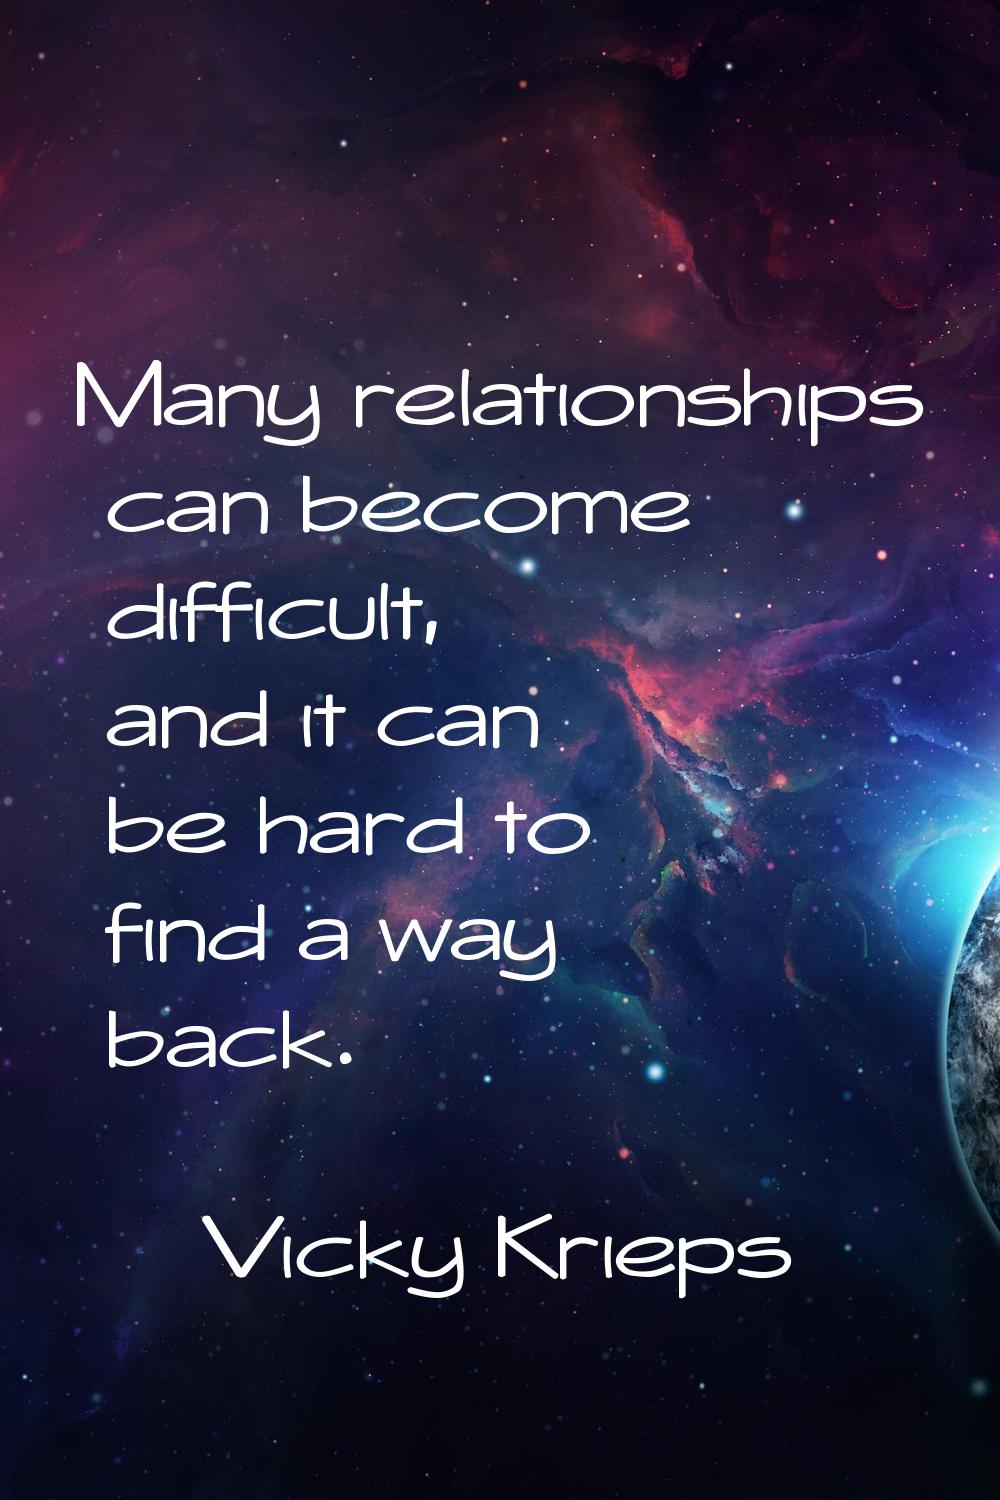 Many relationships can become difficult, and it can be hard to find a way back.